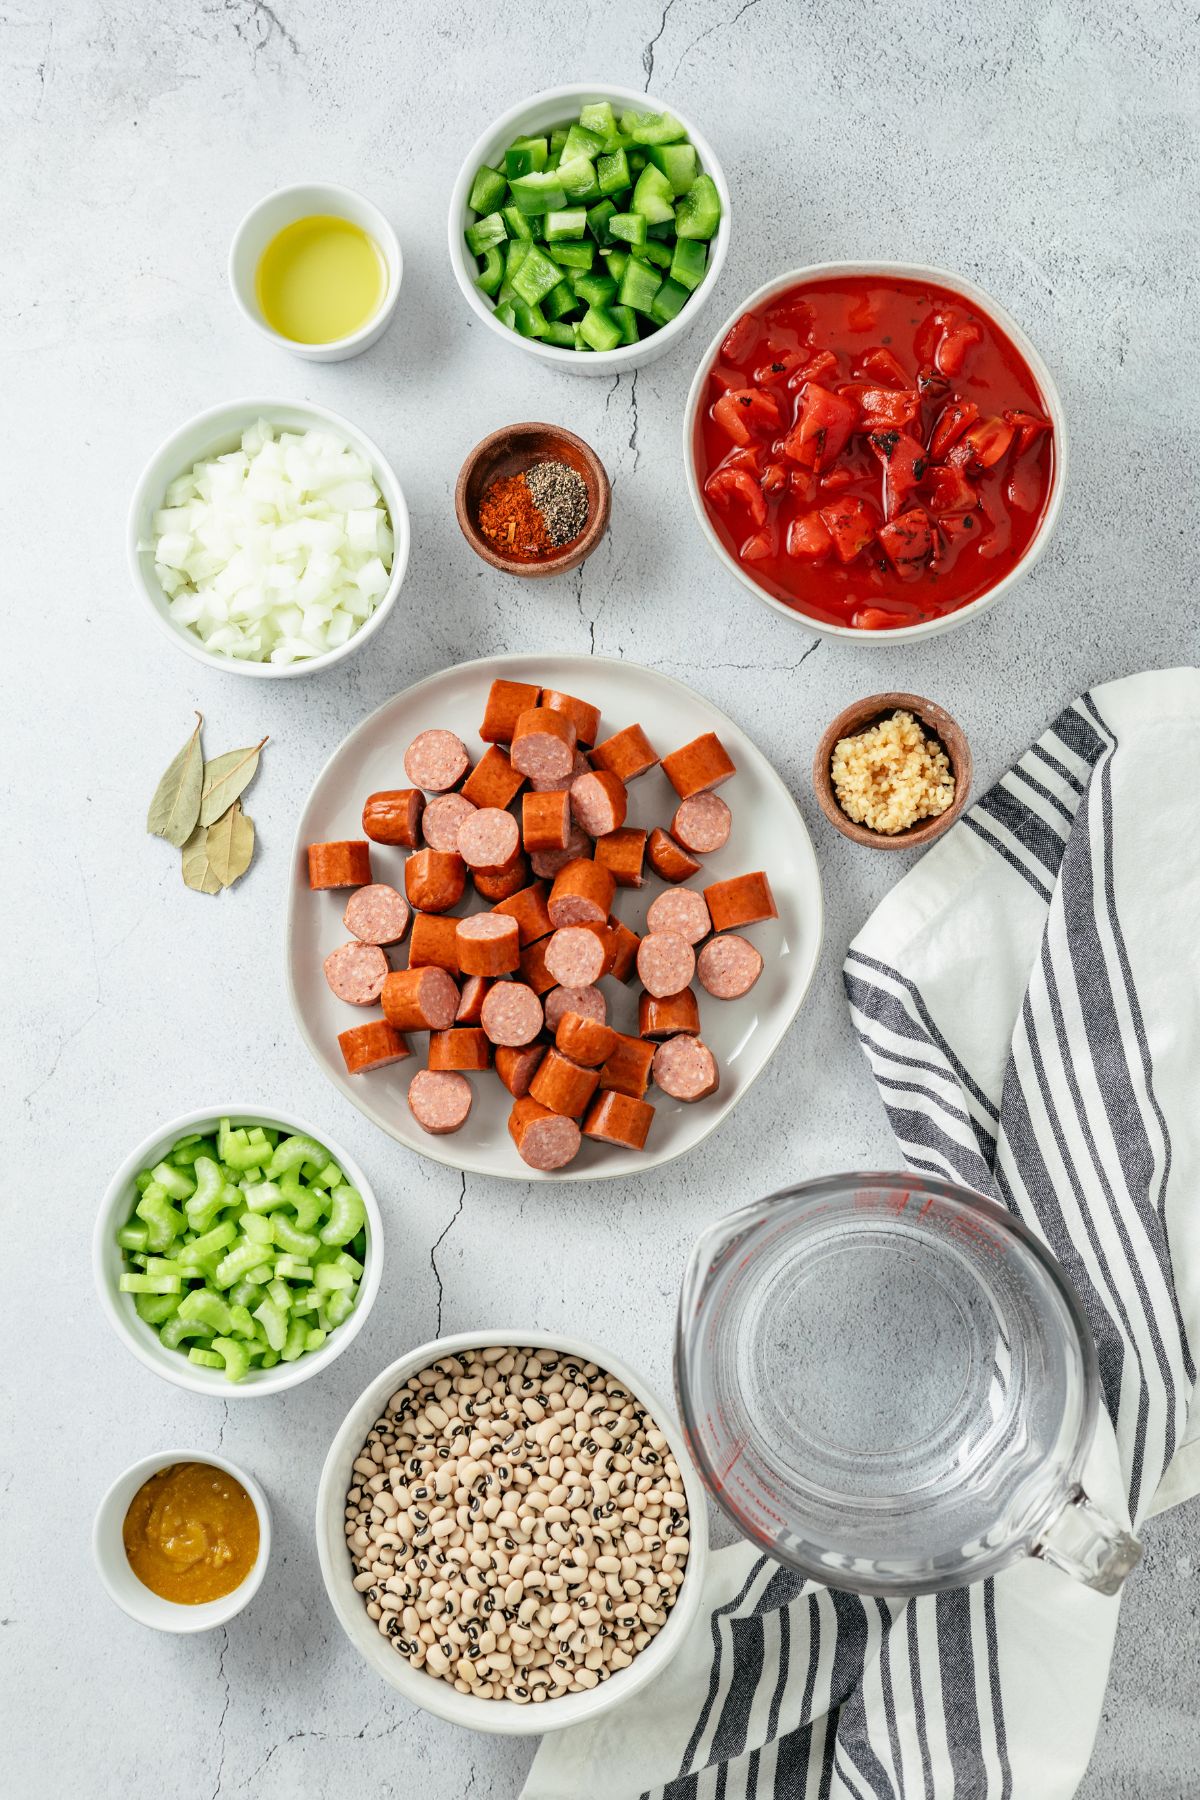 Ingredients for flavorful Black Eyed Peas Soup: Avocado oil, kielbasa sausage, yellow onions, green bell pepper, celery, minced fresh garlic, fire-roasted tomatoes, dried black-eyed peas, water, Better than chicken bouillon, bay leaves, black pepper, and homemade Cajun seasoning.